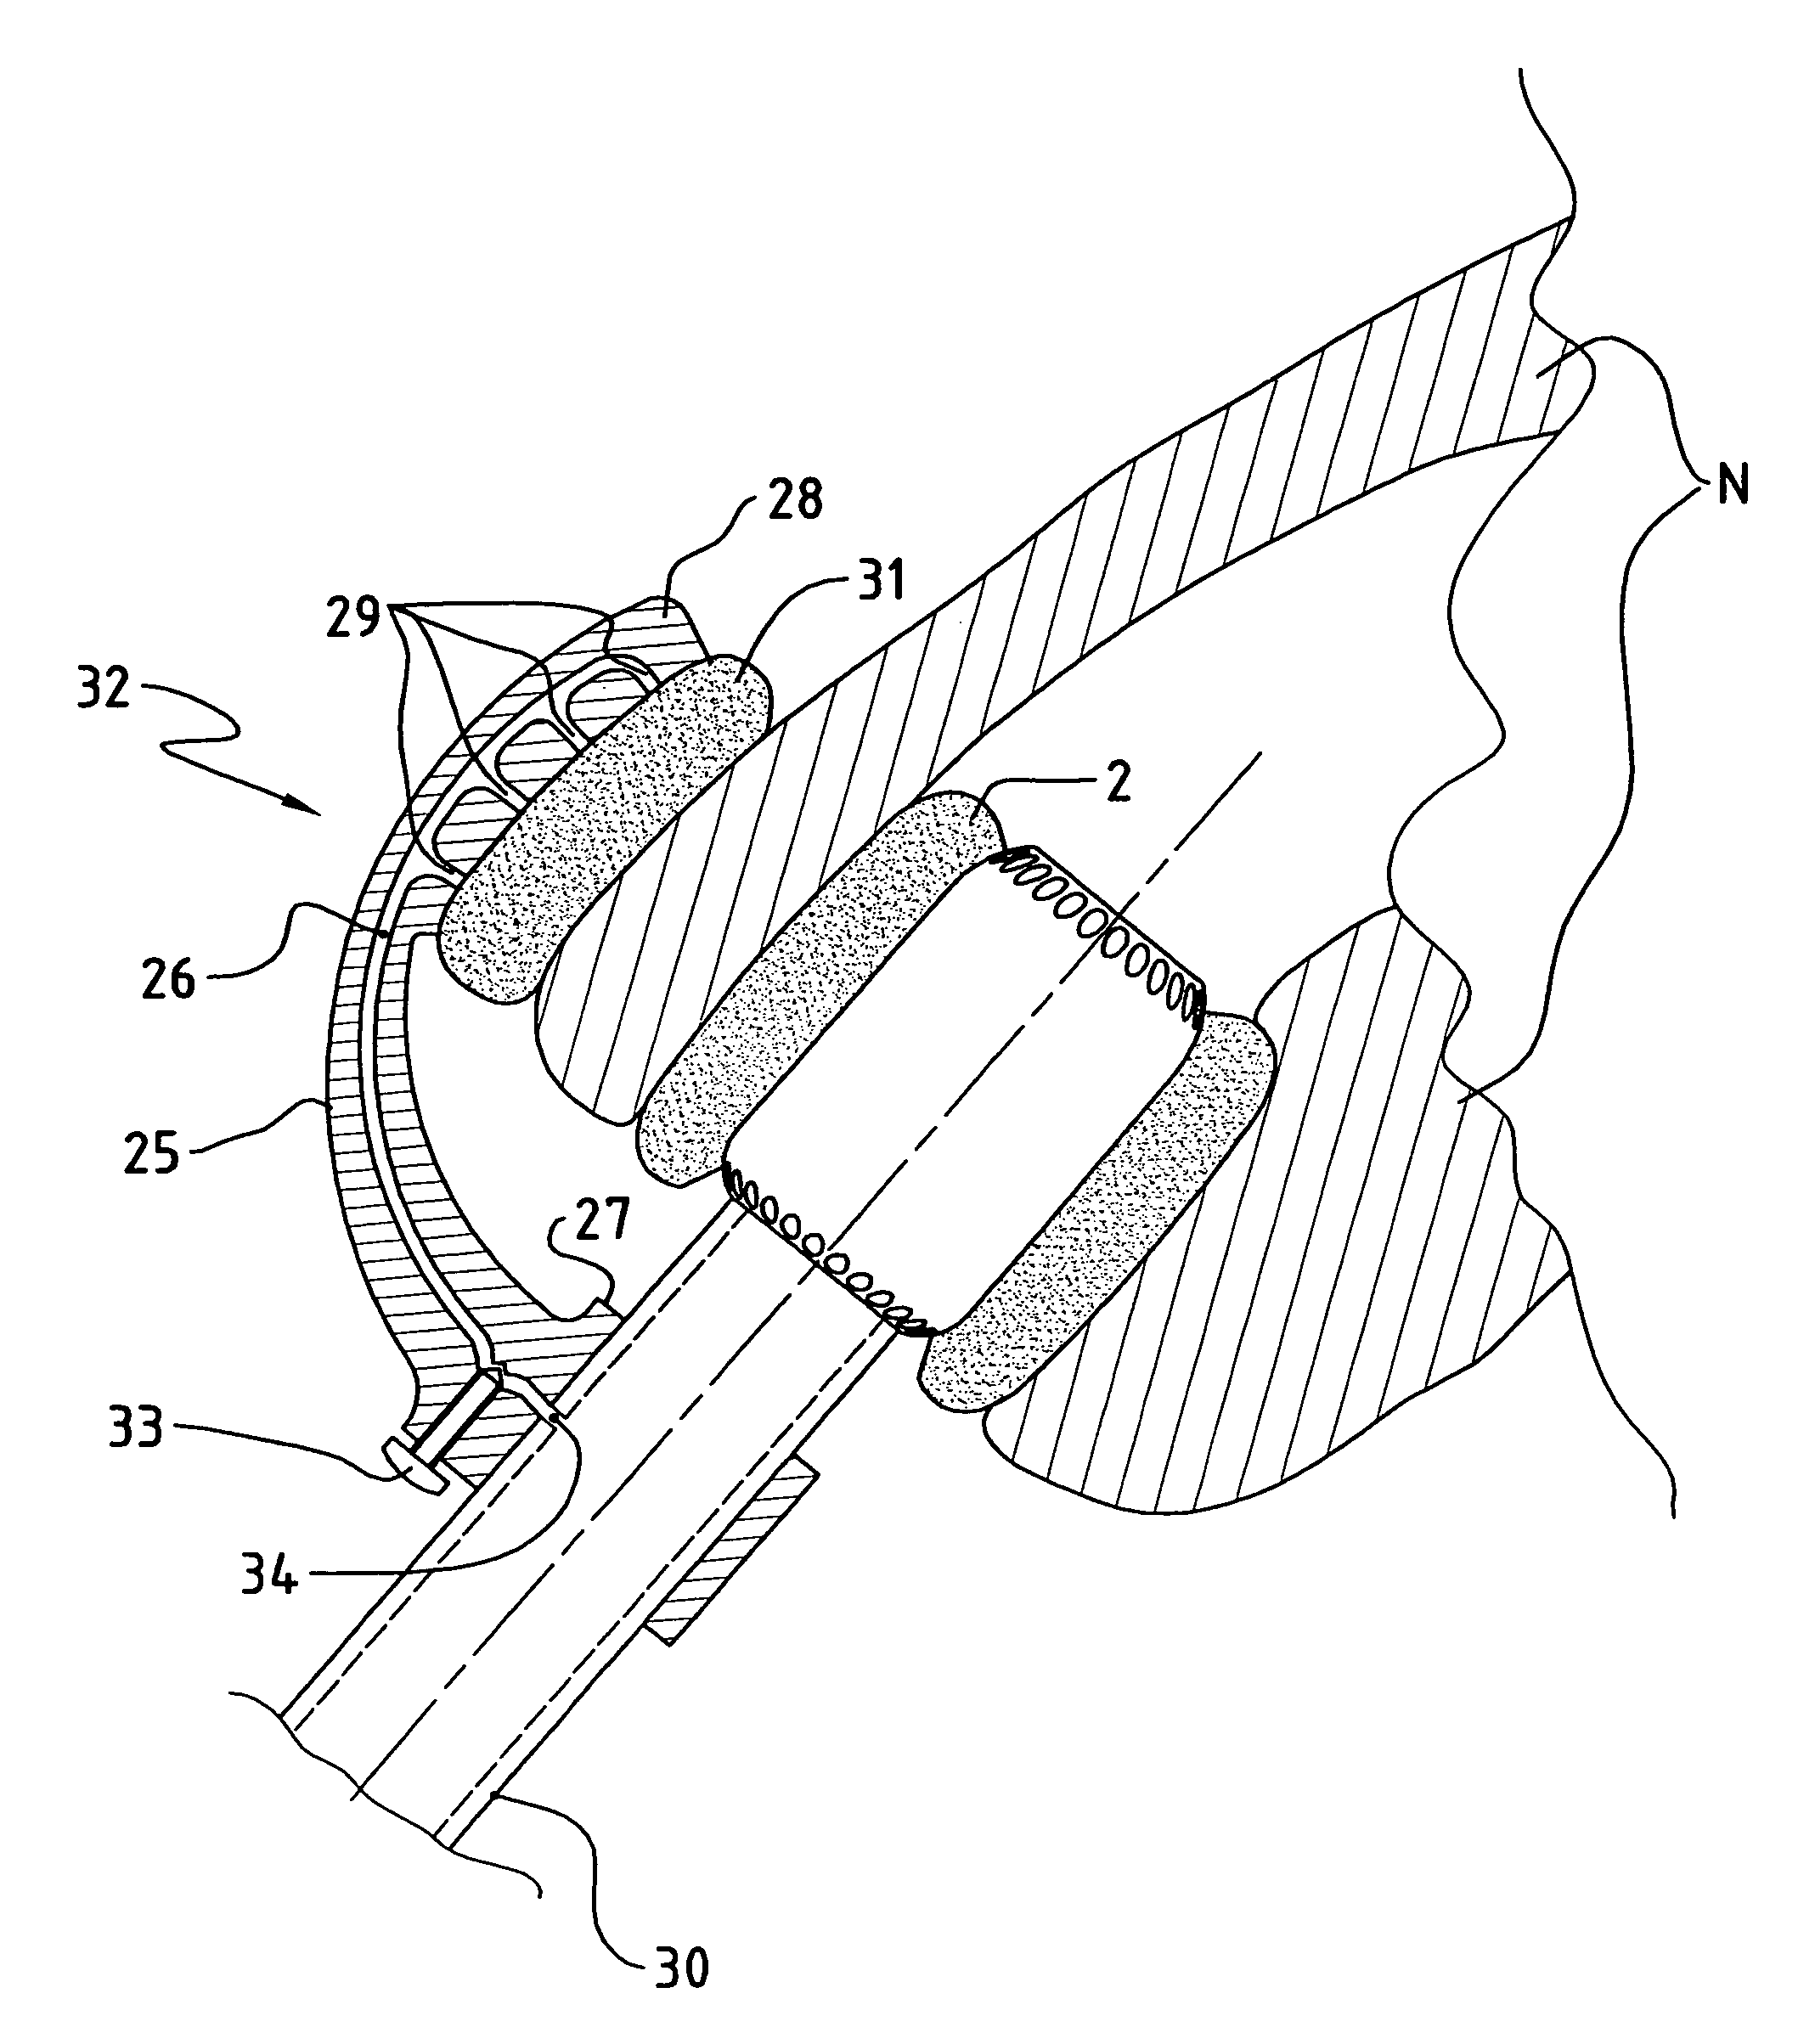 Device for delivering respiratory gas directly into the nose of a user